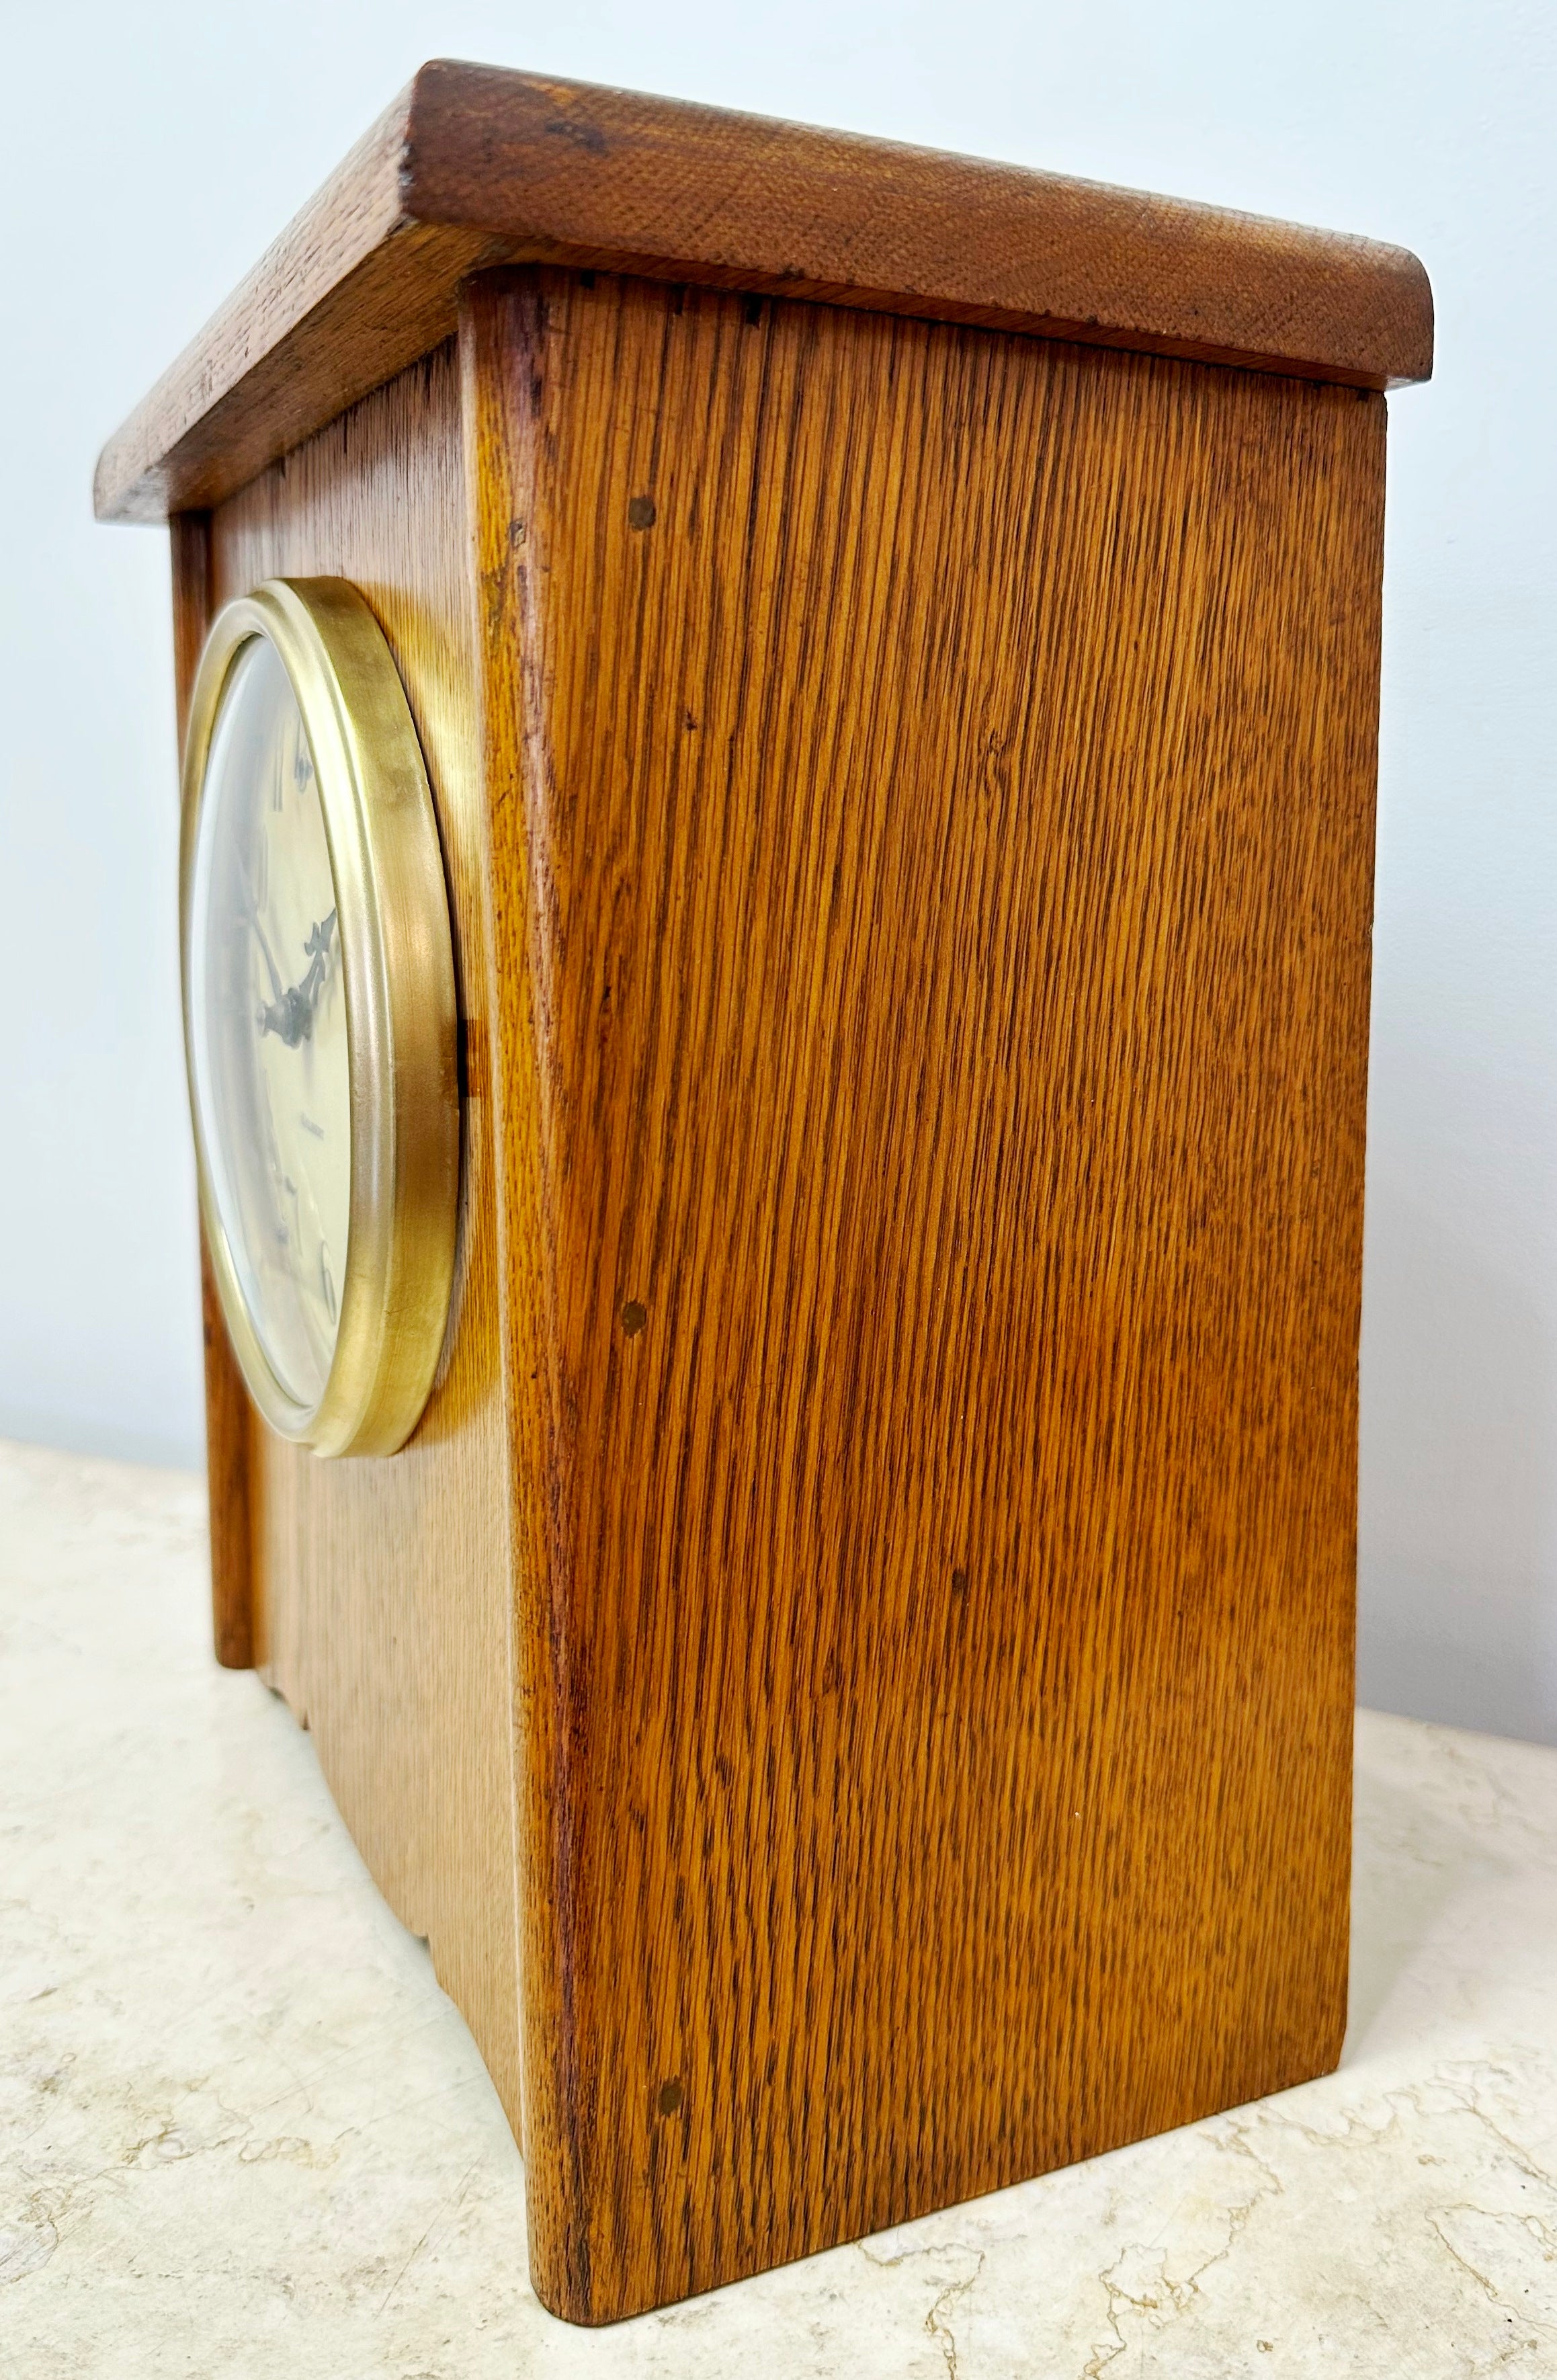 Antique GILBERT U.S.A Hammer on Coil Chime Mantel Clock | eXibit collection